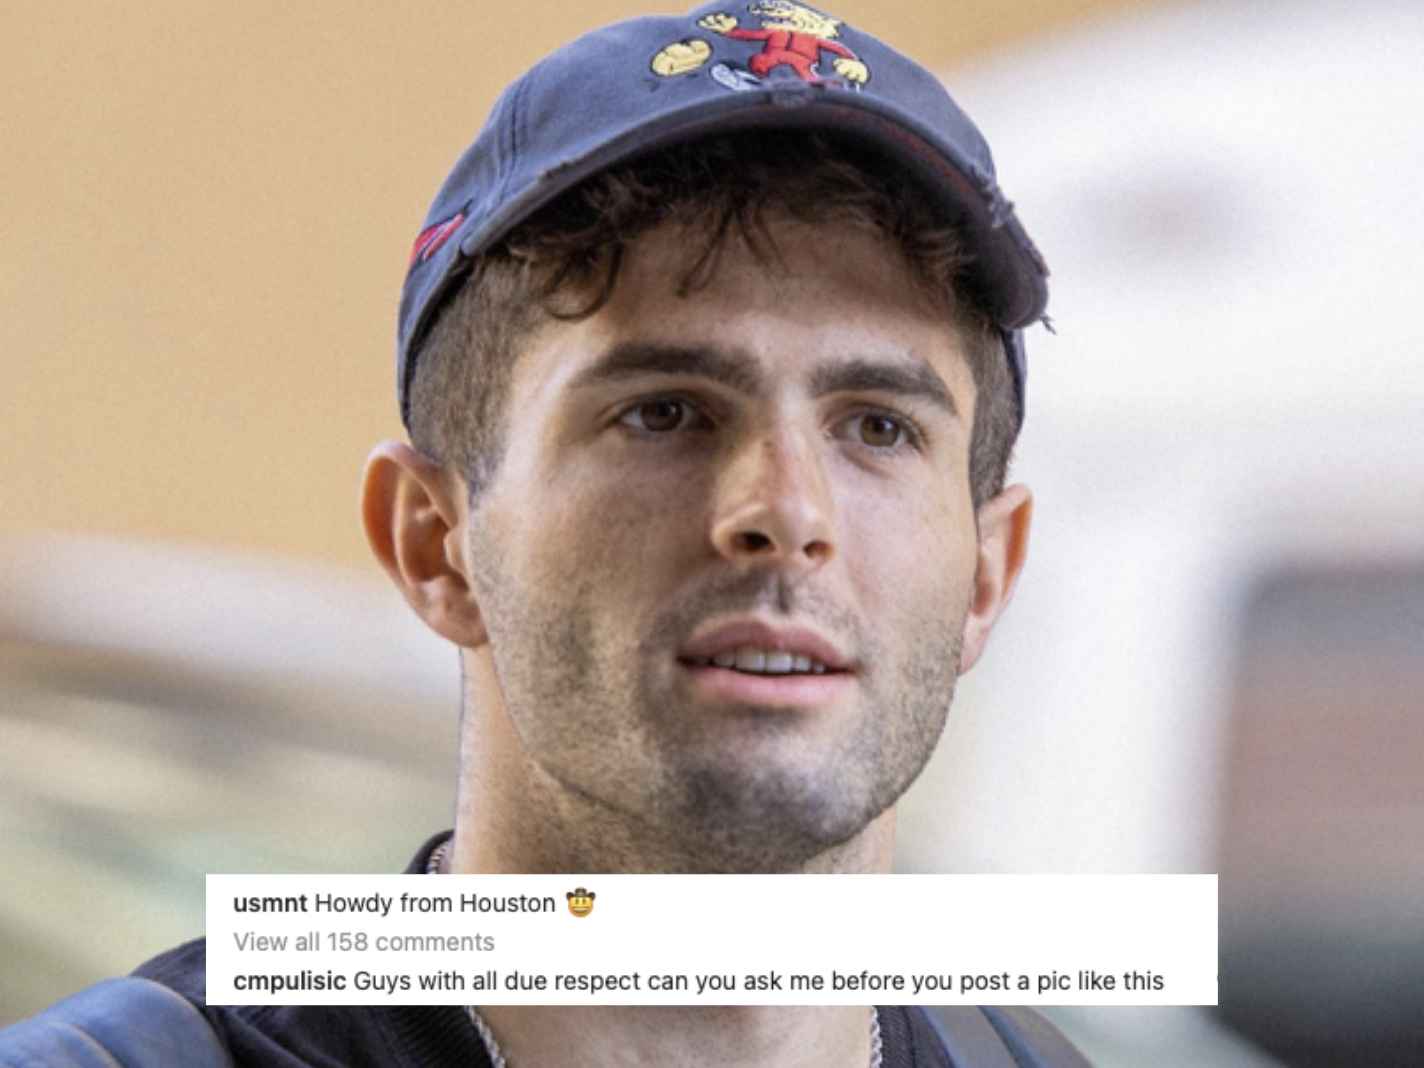 Christian Pulisic complains about USMNT posting his photo on Instagram